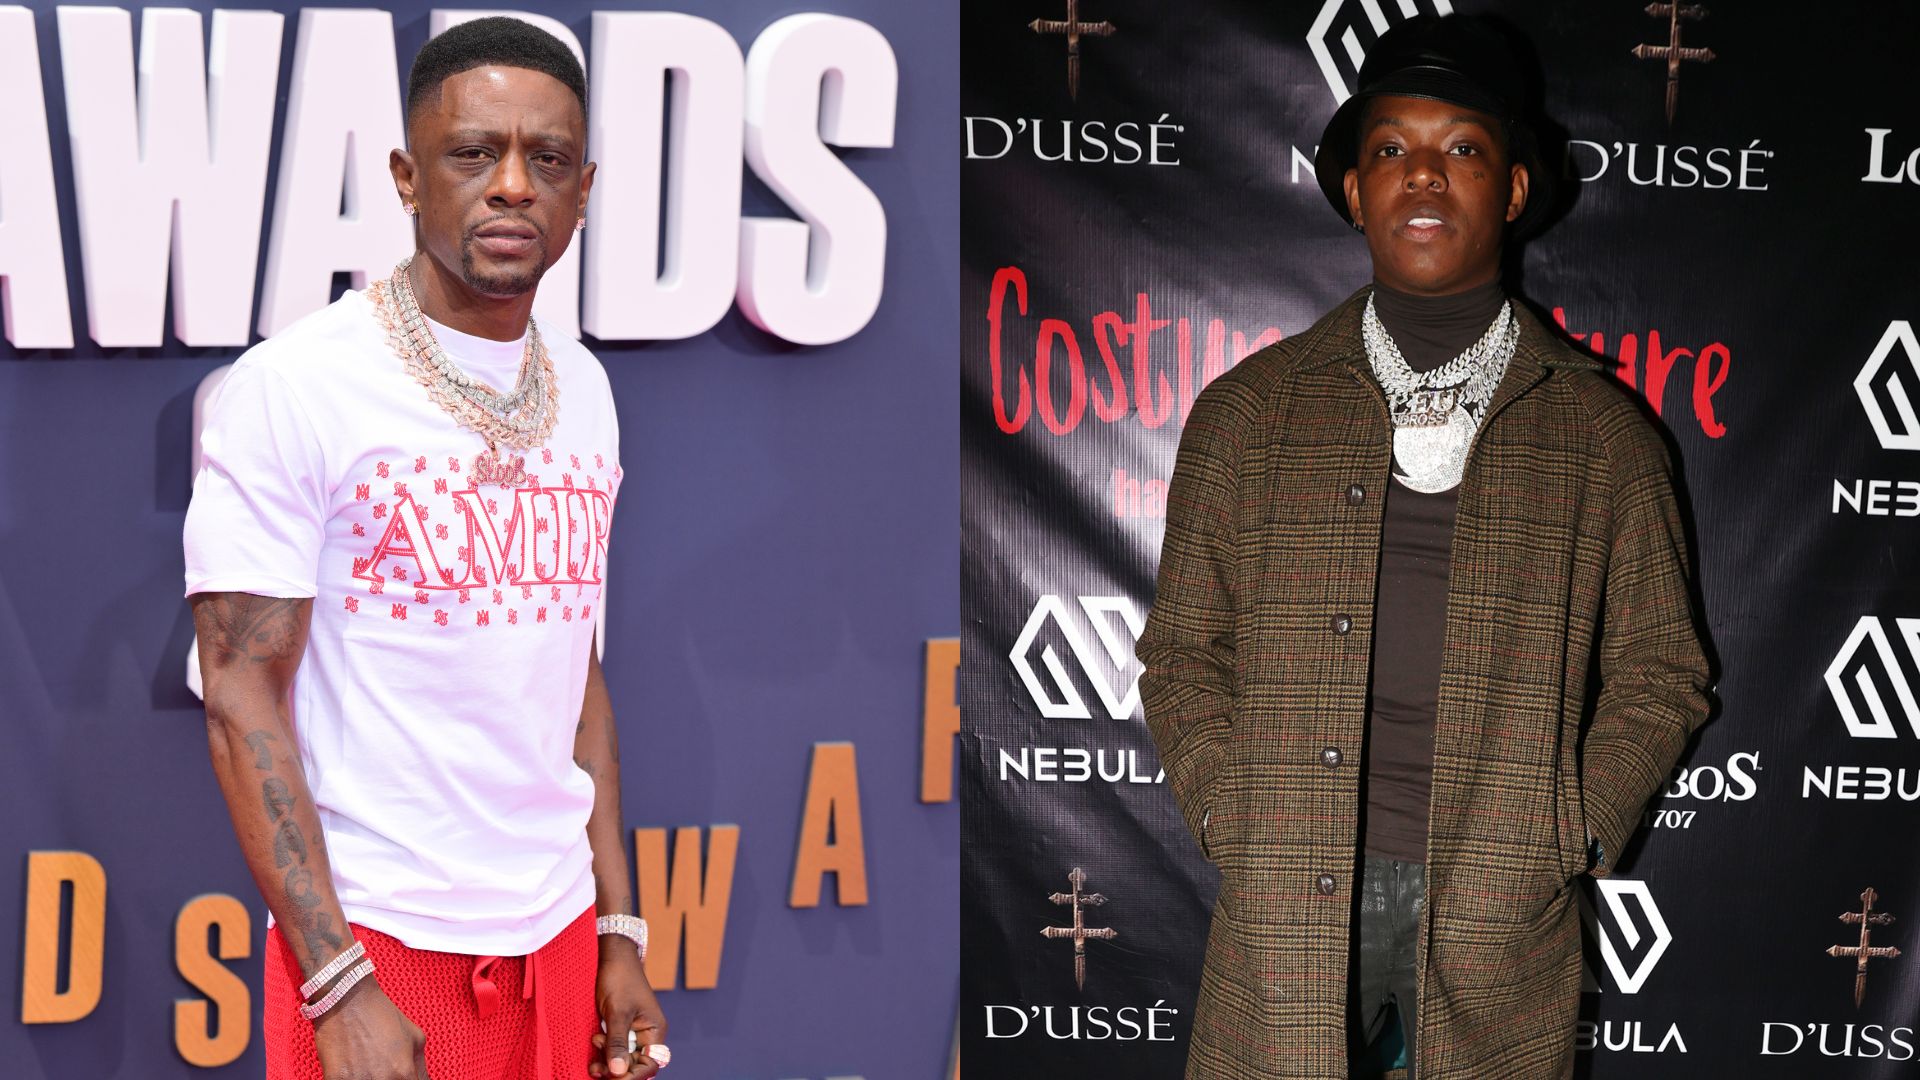 Boosie Badazz Refuses To Comment On Yung Bleu’s Wife Drama Amid Their Beef